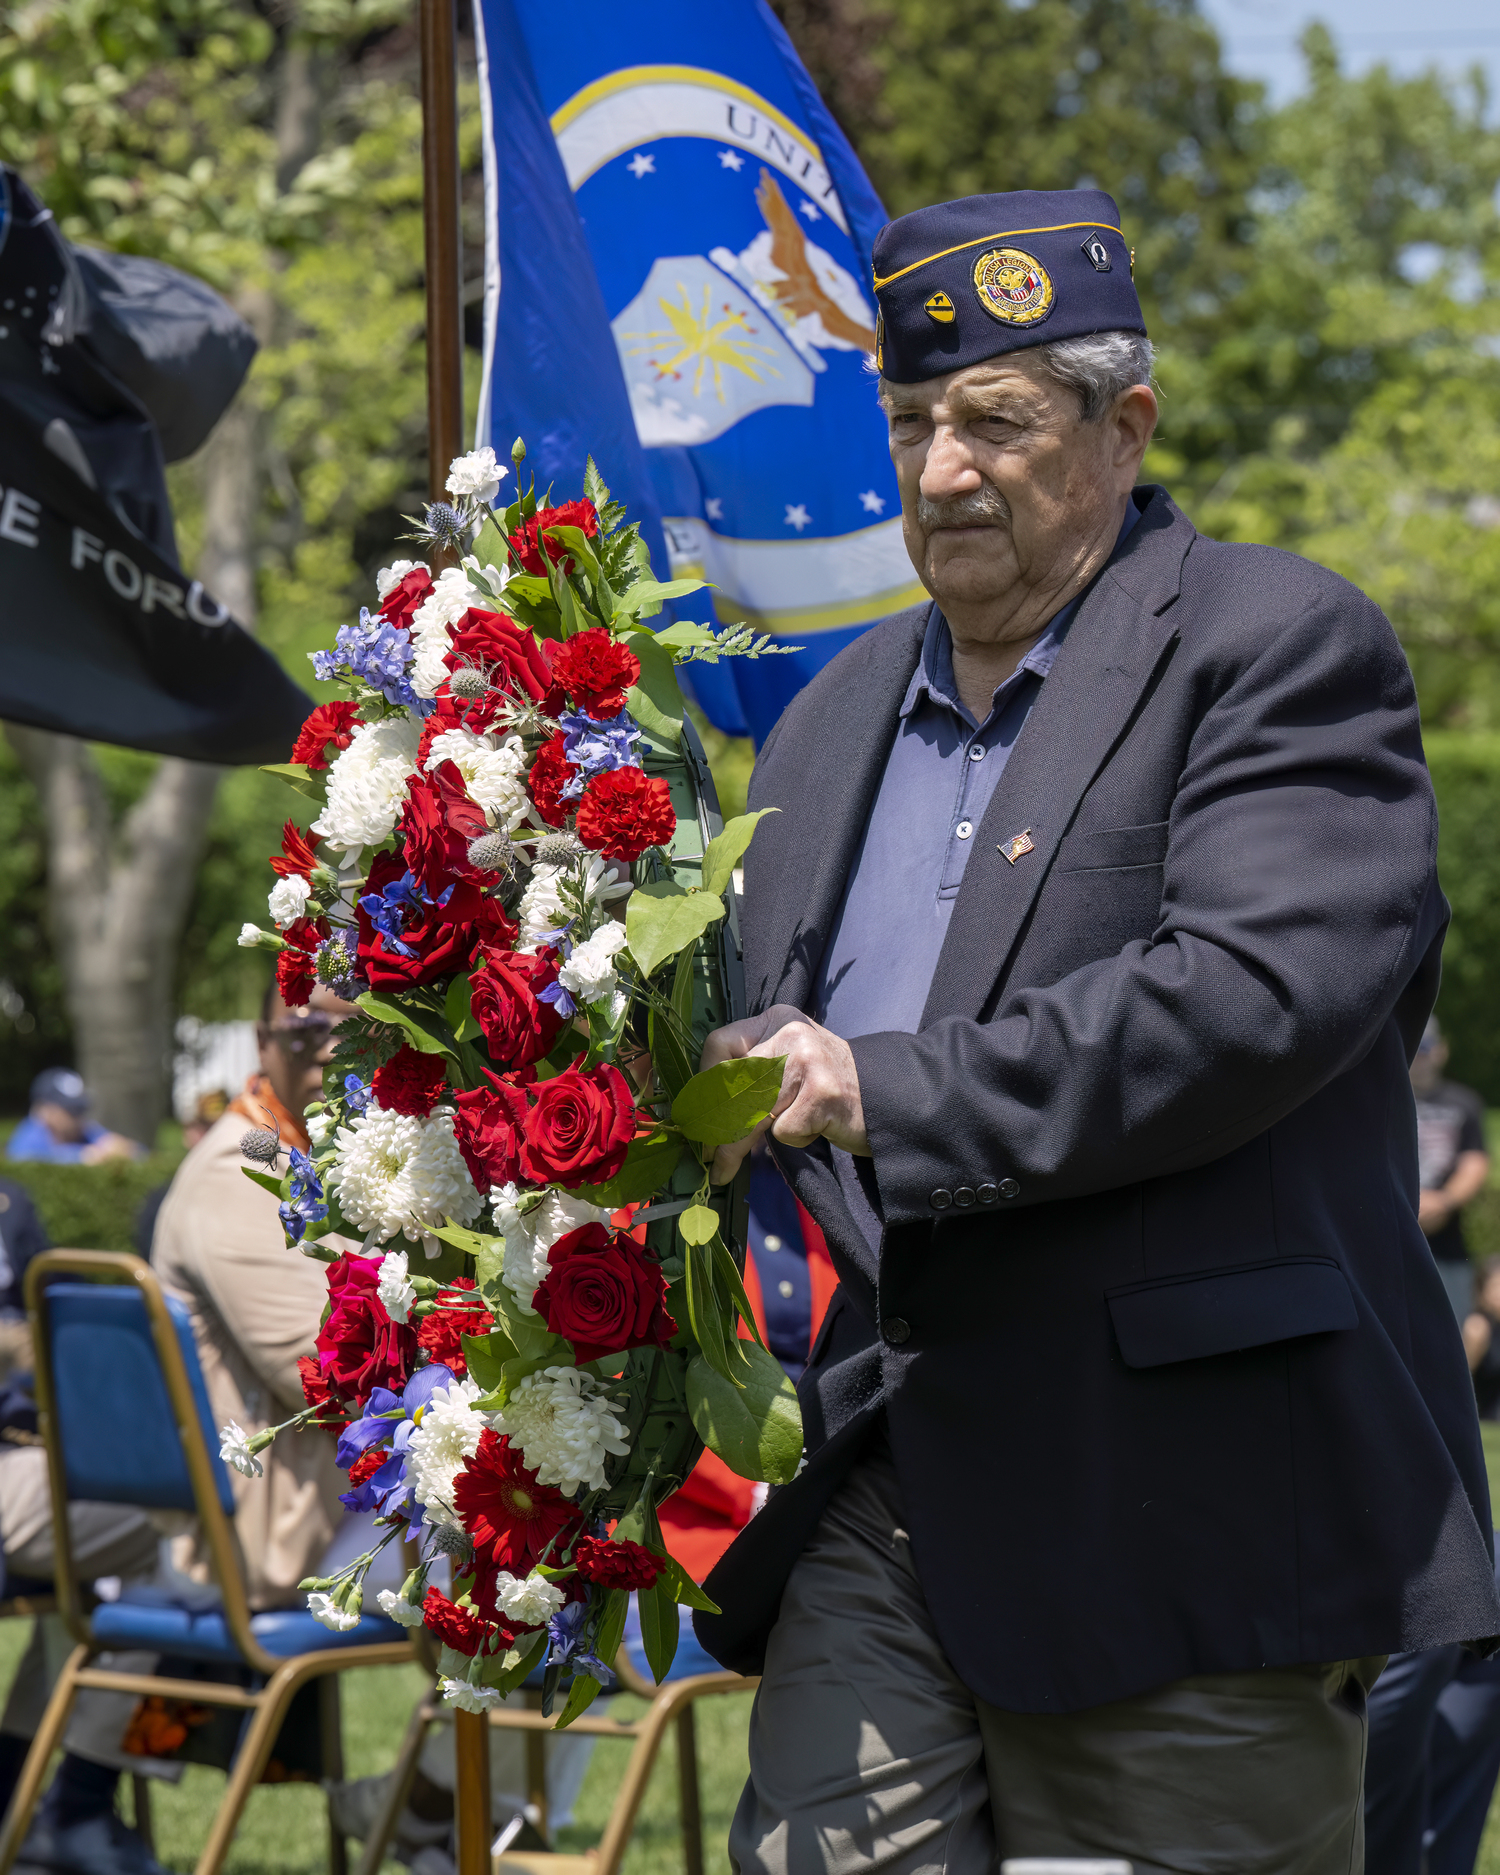 A wreath is placed during the Memorial Day service in Agawam Park in Southampton Village on Monday.